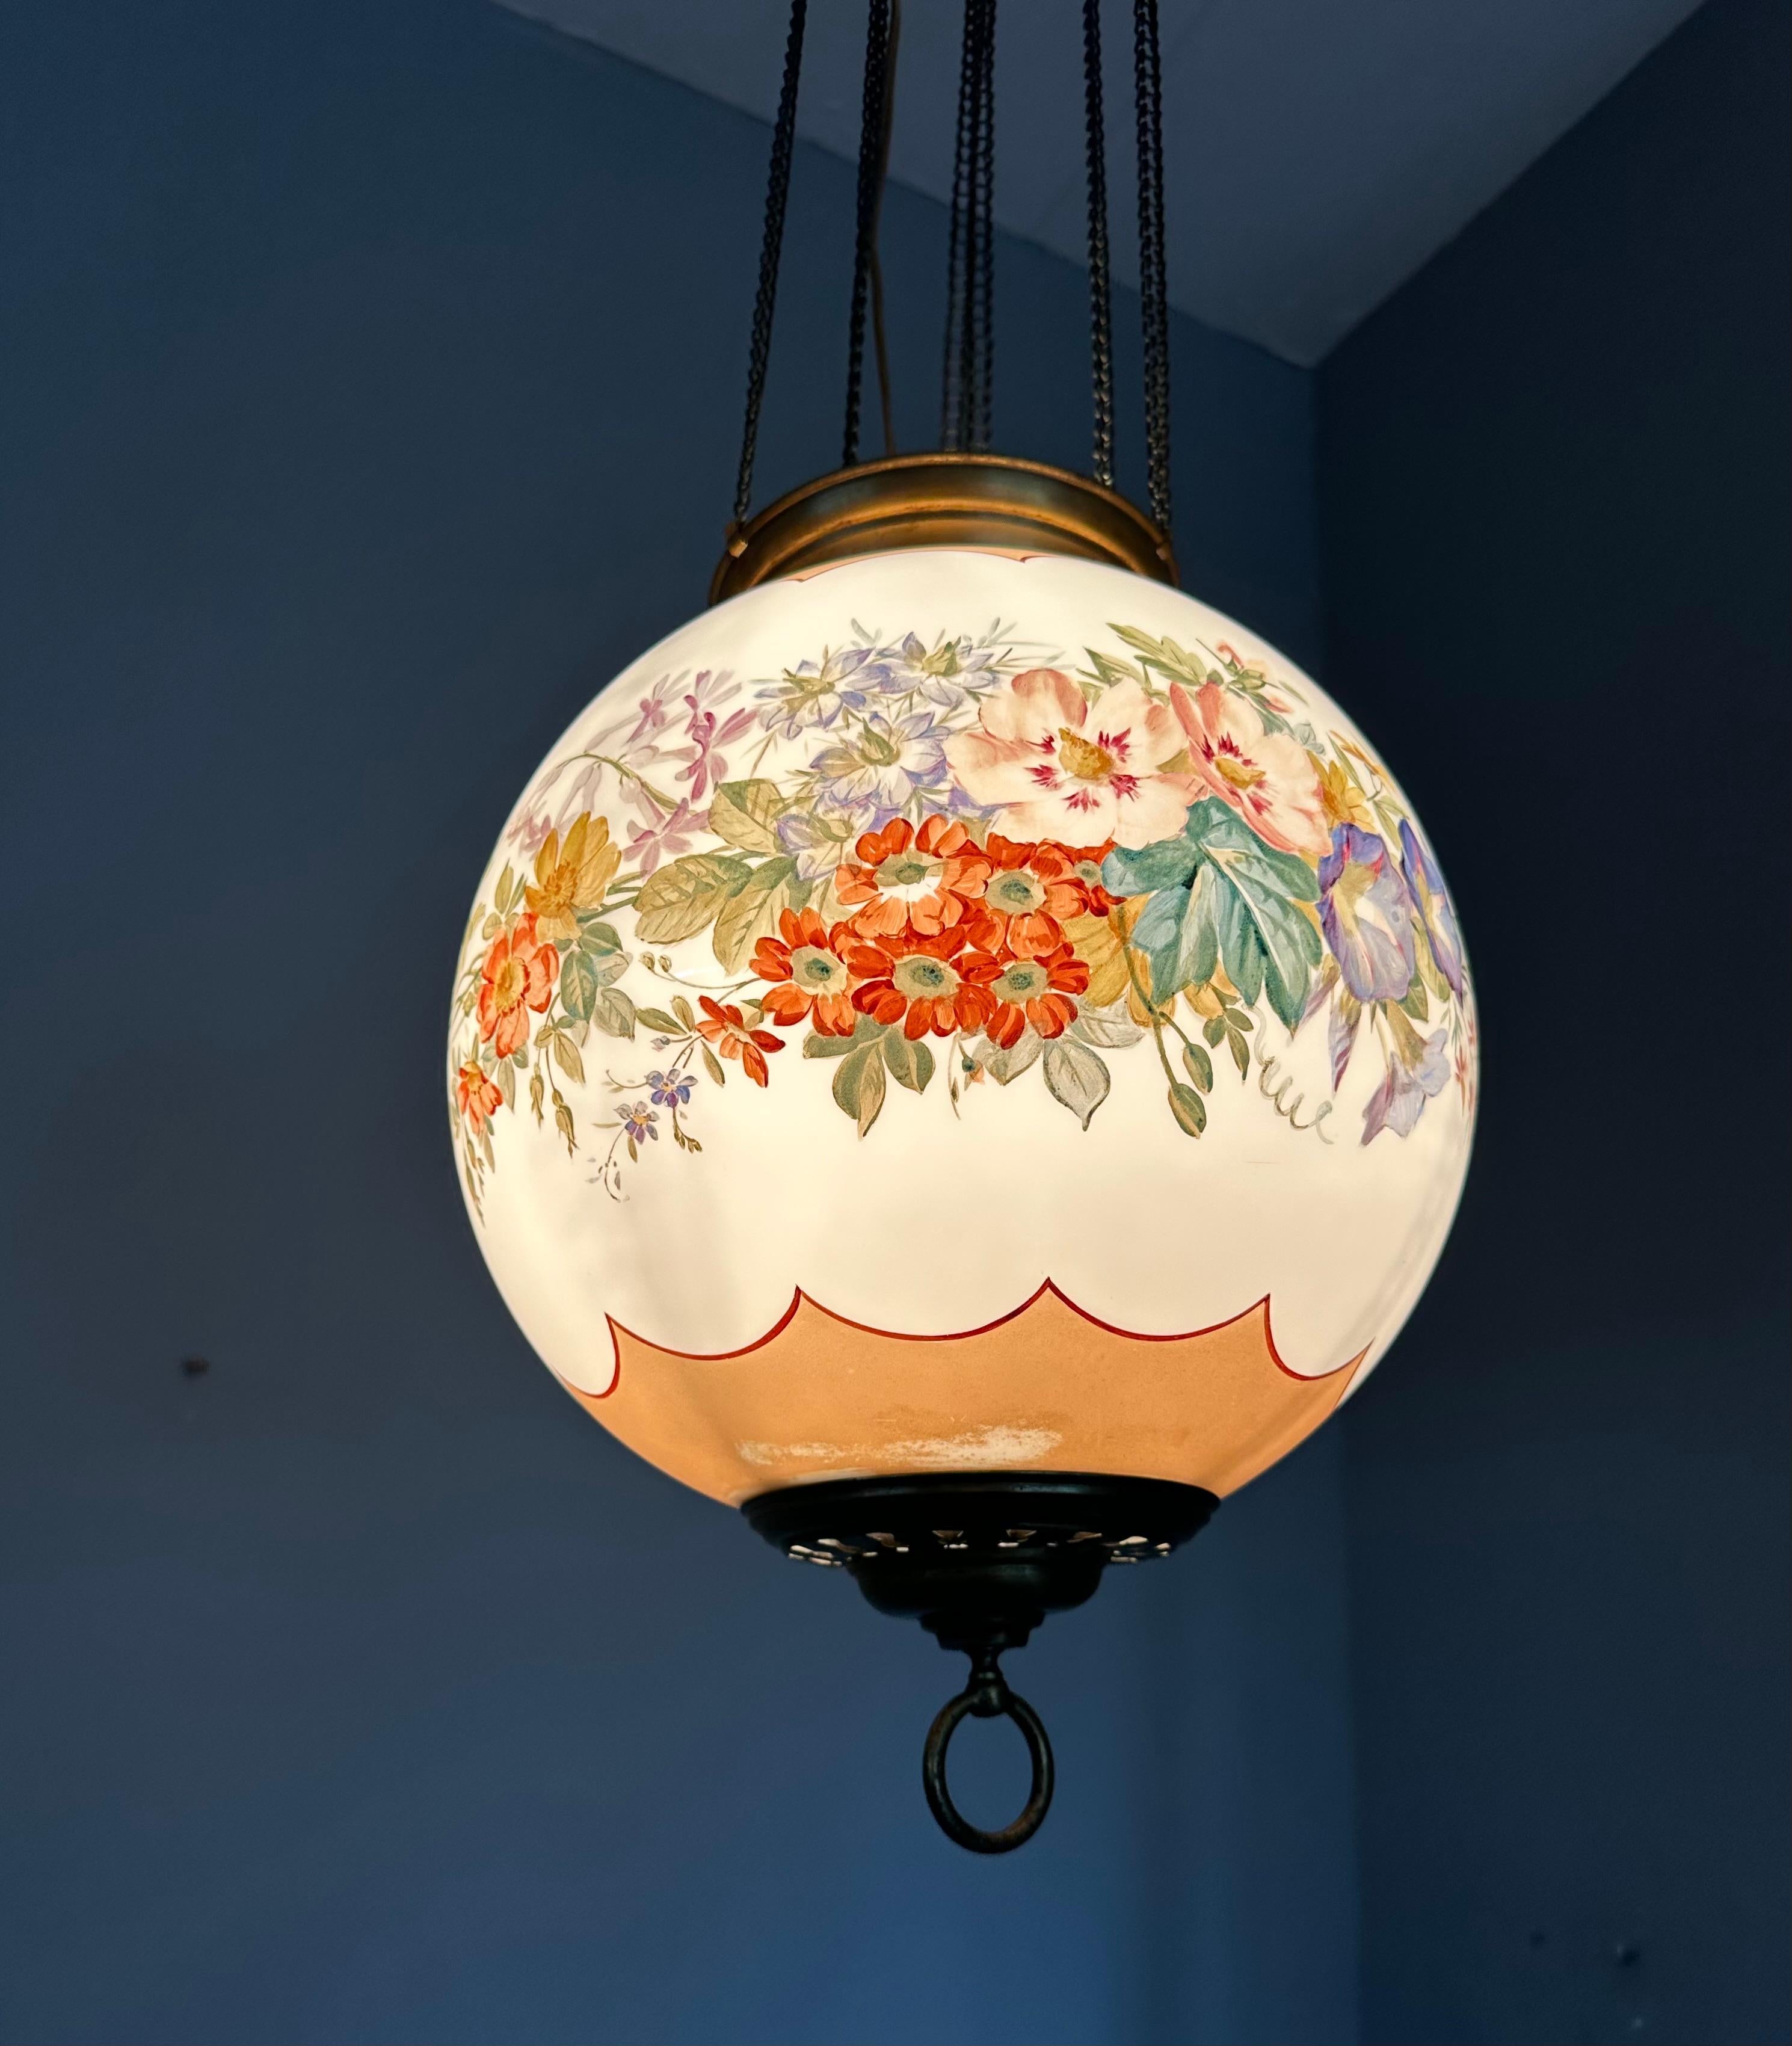 Antique Round Opaline Glass Shade Pendant Light with Wreath of Flowers Decor For Sale 7